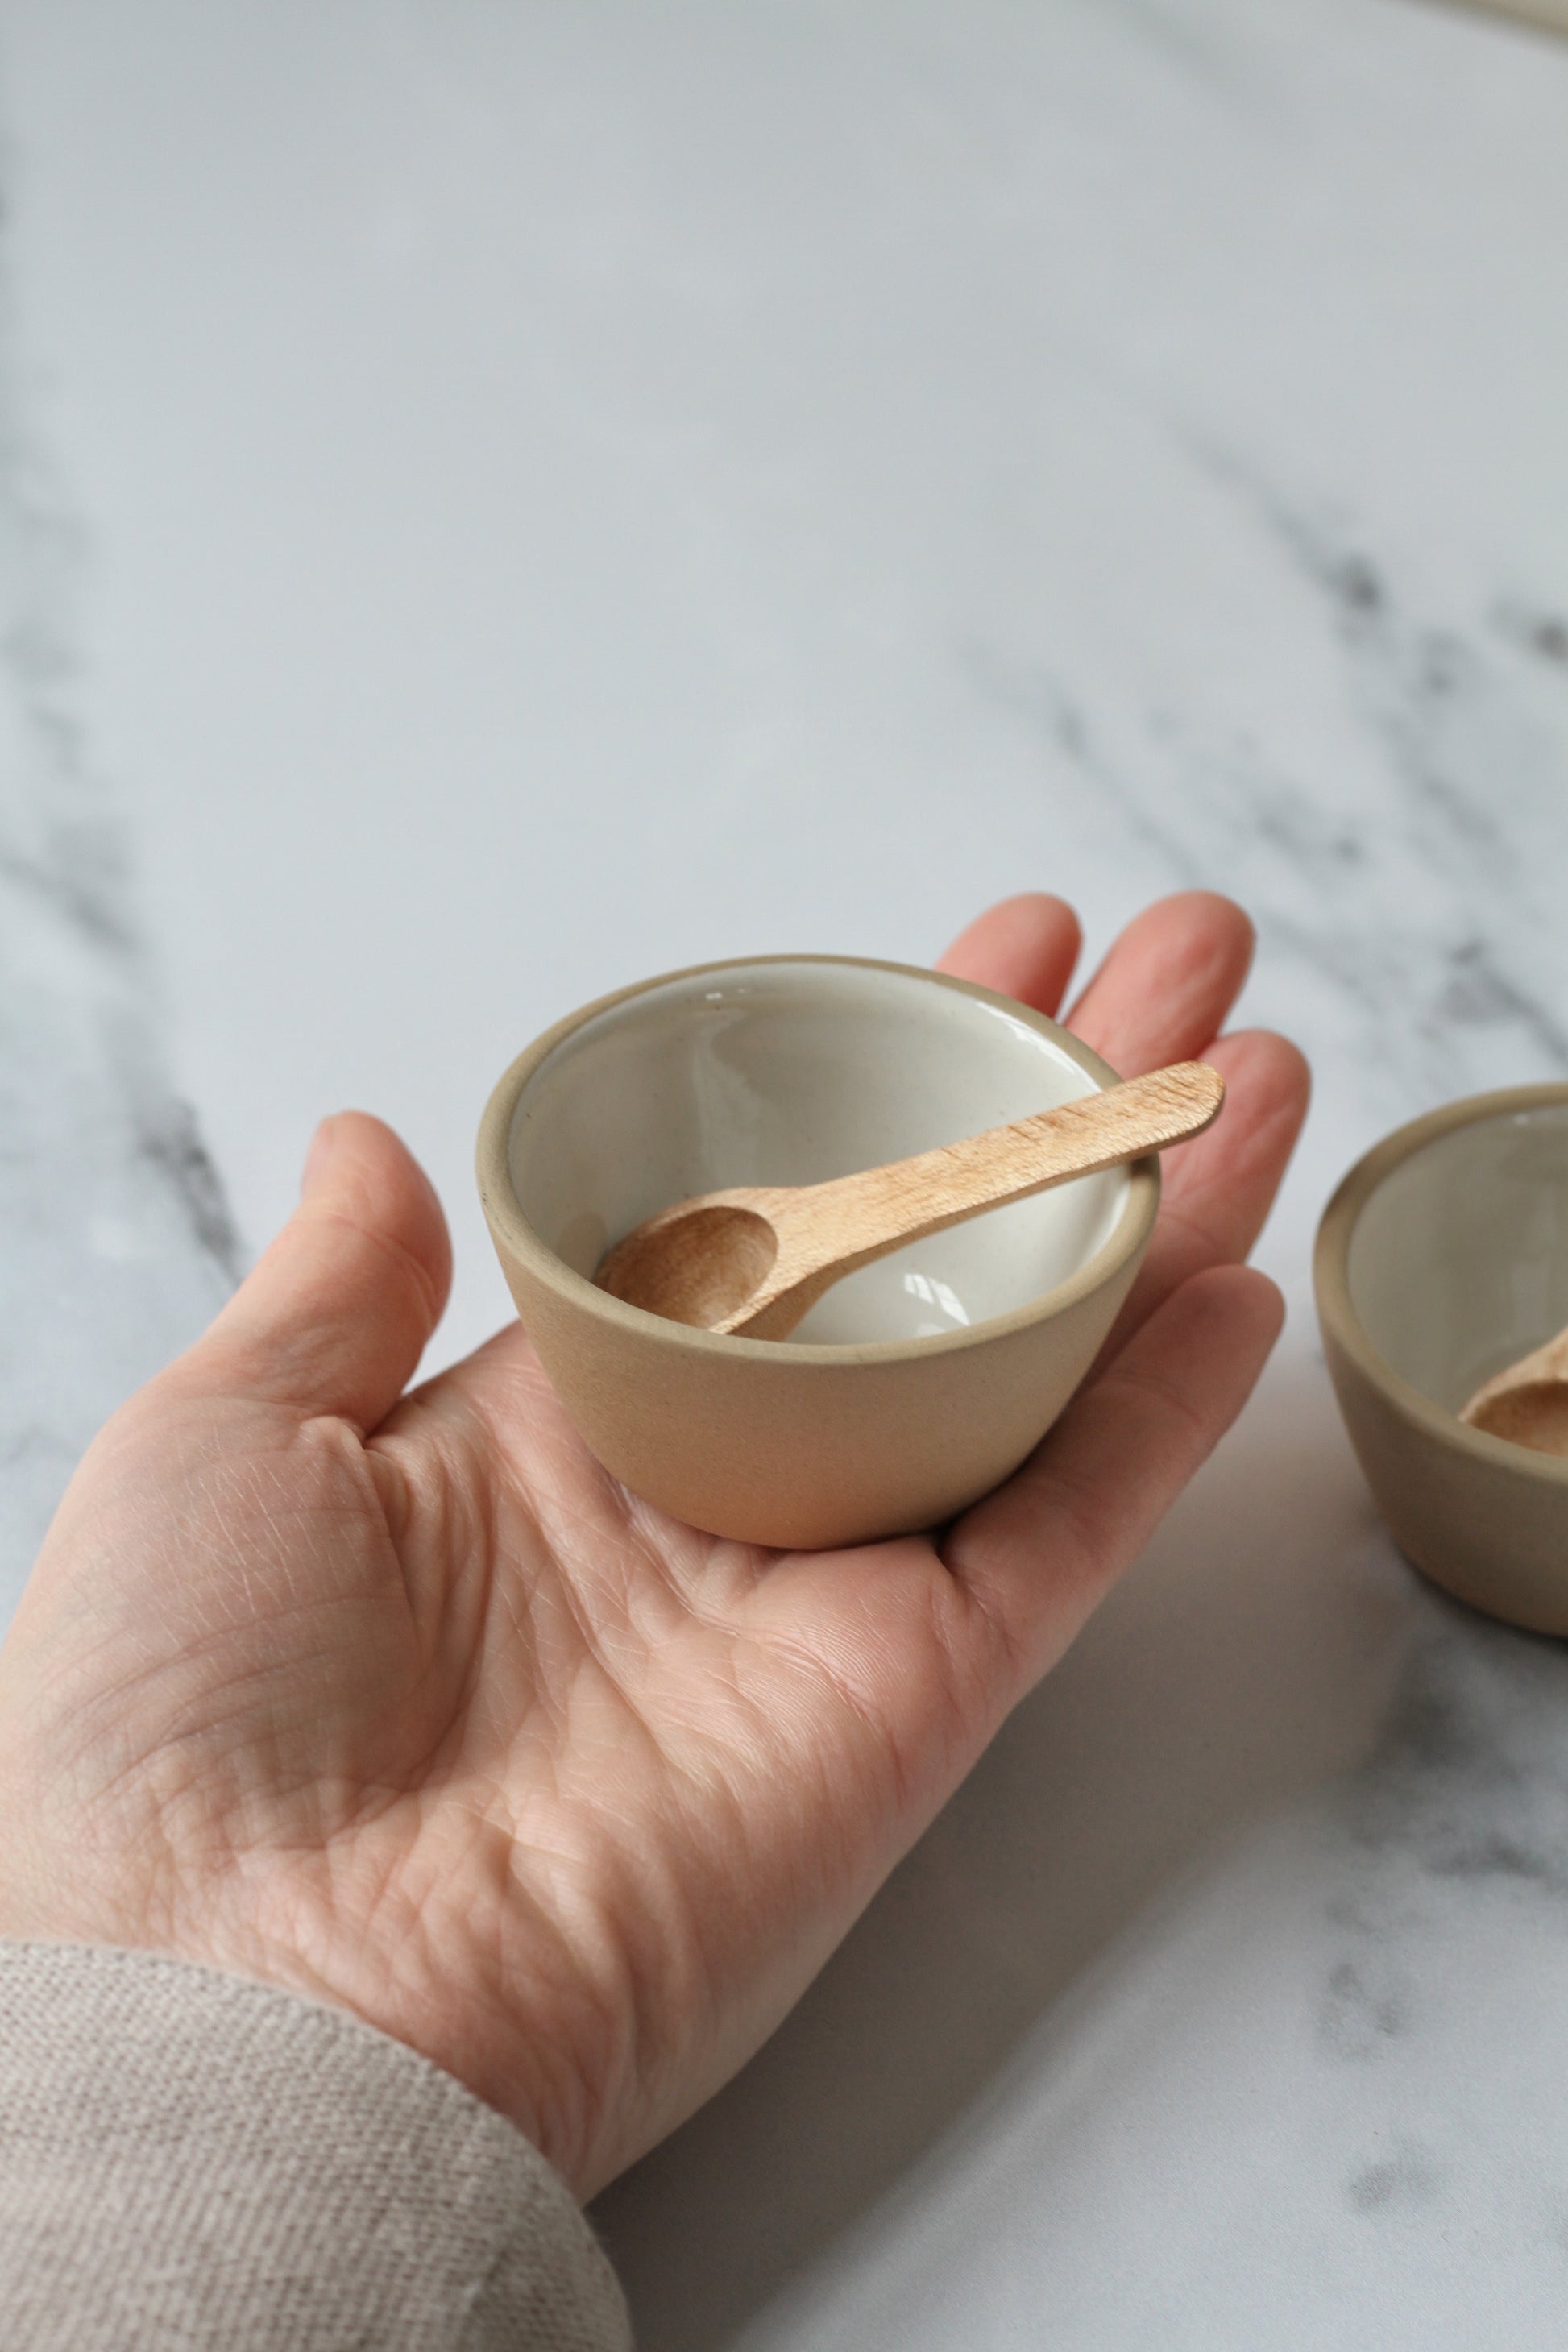 pair of white pinch pots with wooden spoons